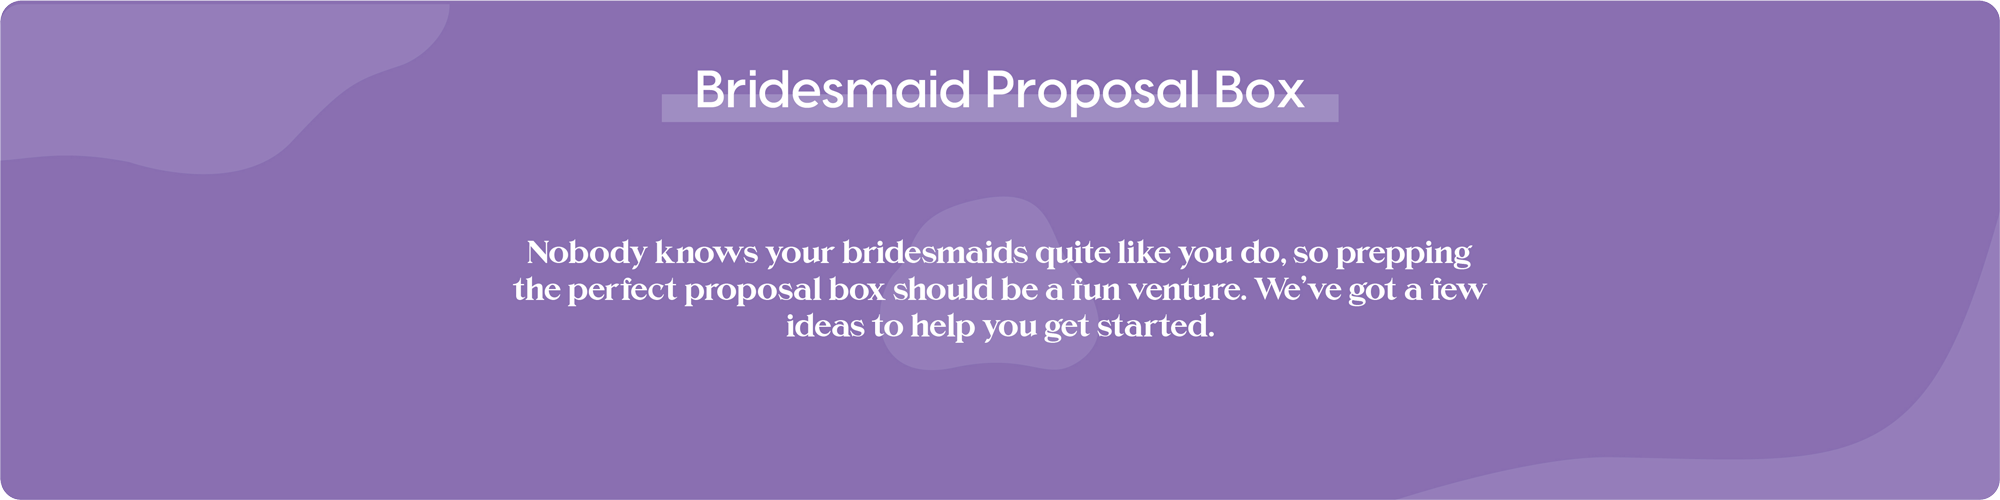 What to include in a Bridesmaid Proposal Box